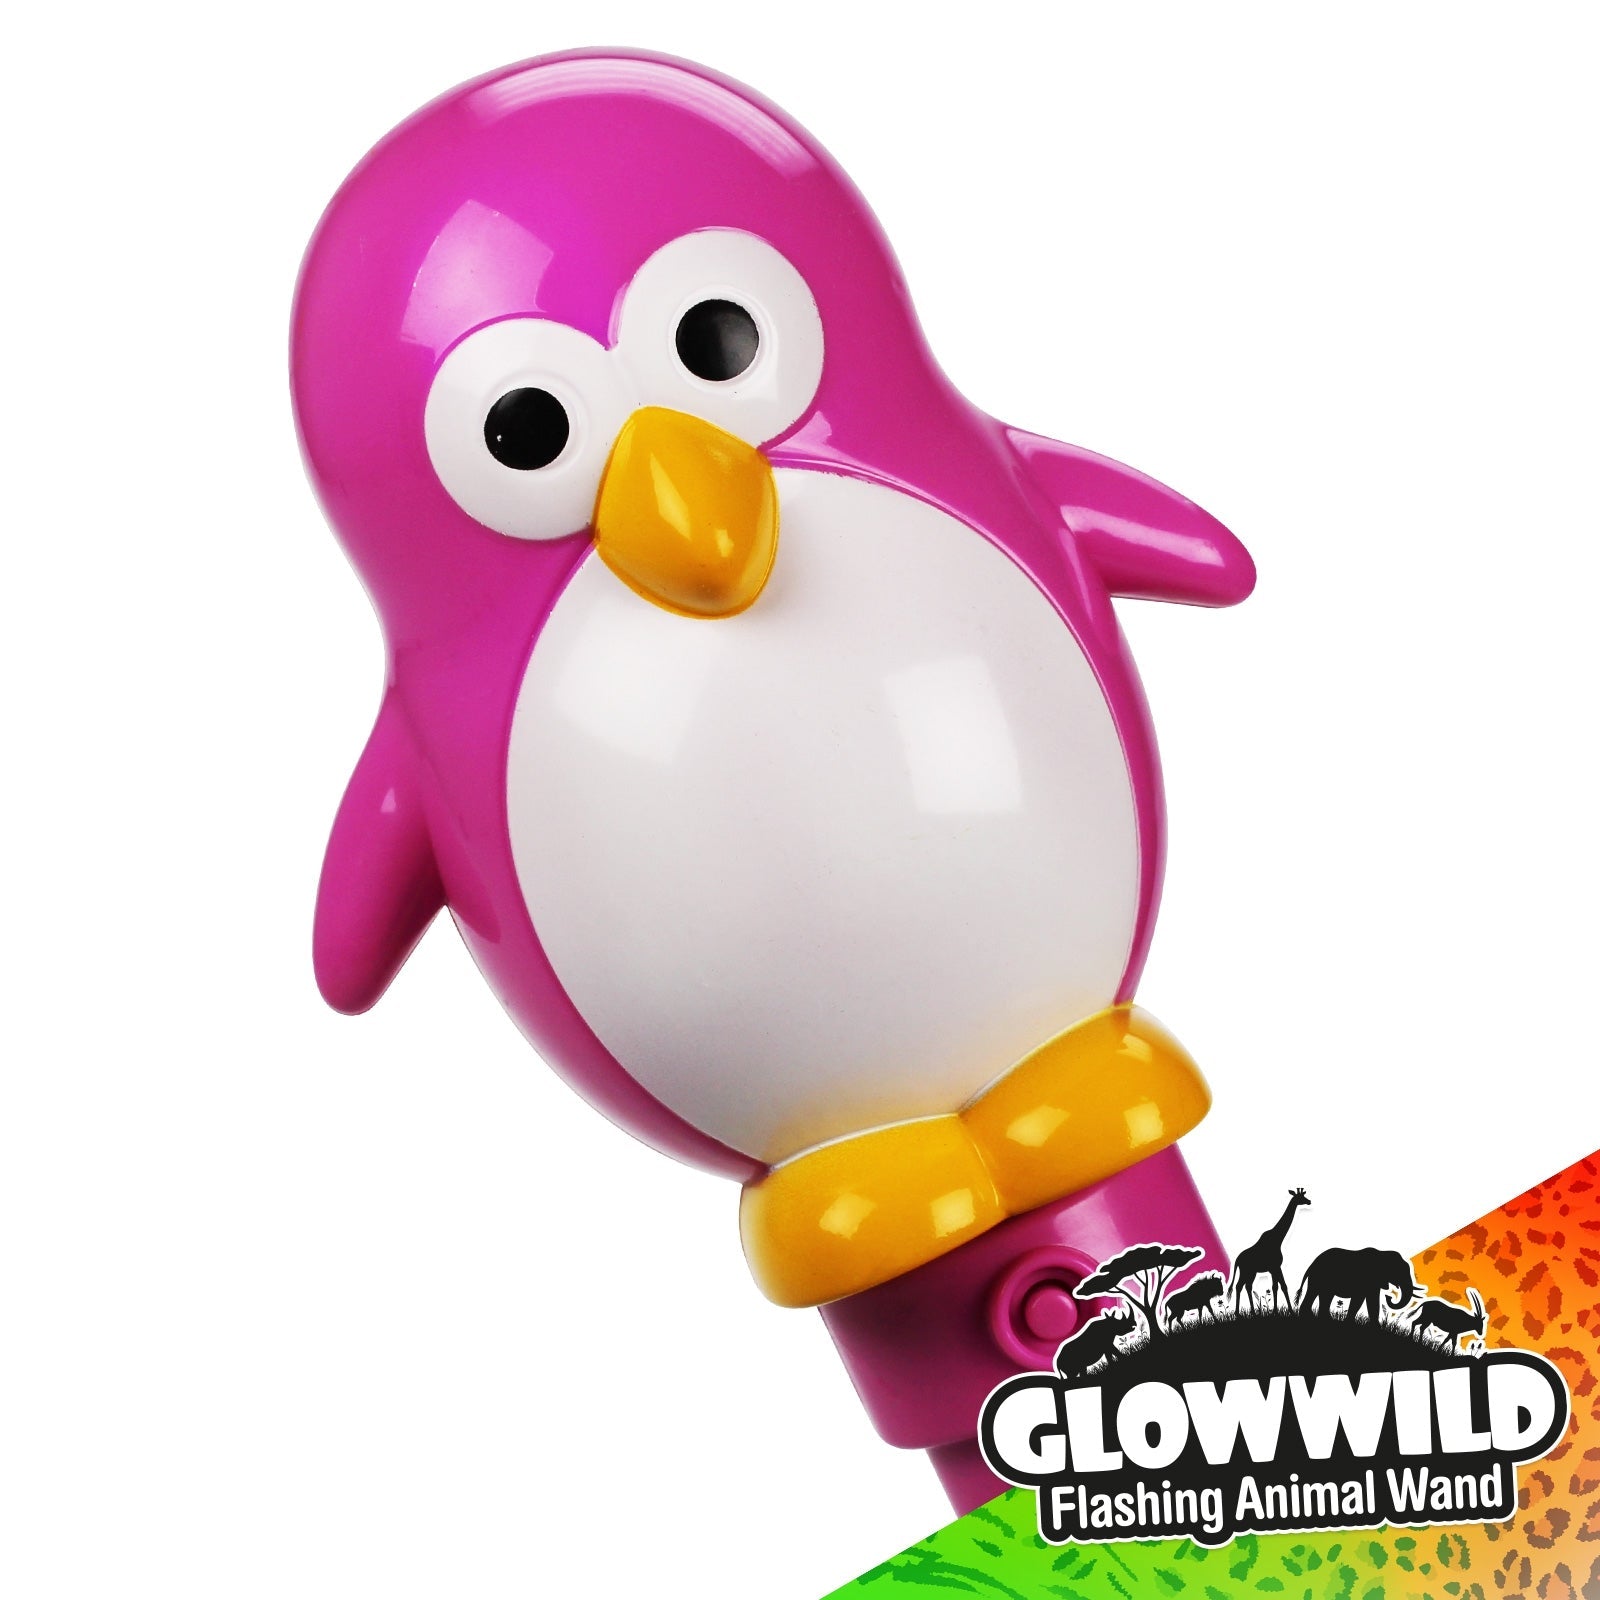 Penguin Mega Light Up Animal Wand 11", The coolest animal wand, this cute Penguin Mega Light Up Animal Wand is packed full of multi coloured, flashing LEDs that cycle through funky colour flash effects! A substantial wand or baton that's topped with a pink or blue penguin and finished at the base with a colourful disco ball, this playful animal wand is a real attention grabber projecting colourful ilght onto surrounding surfaces for funky disco effects! With batteries included, this cool Penguin Mega Light 